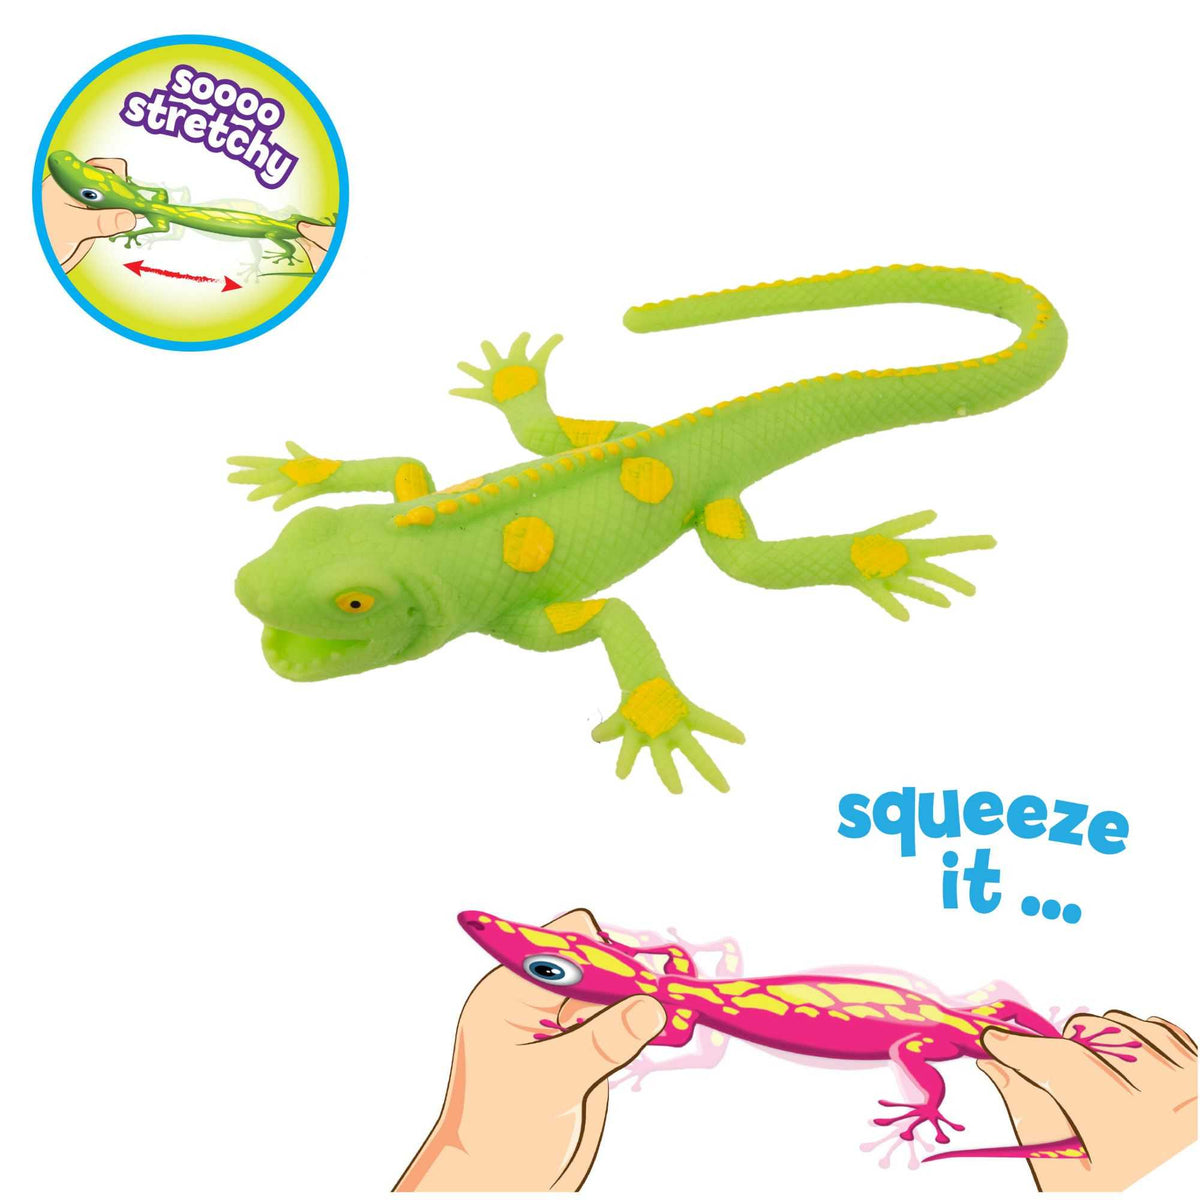 Creepsterz Stretchy Lizards Assorted Fidget Toys | 24 Pack Fidget Toy Bumper Party Pack